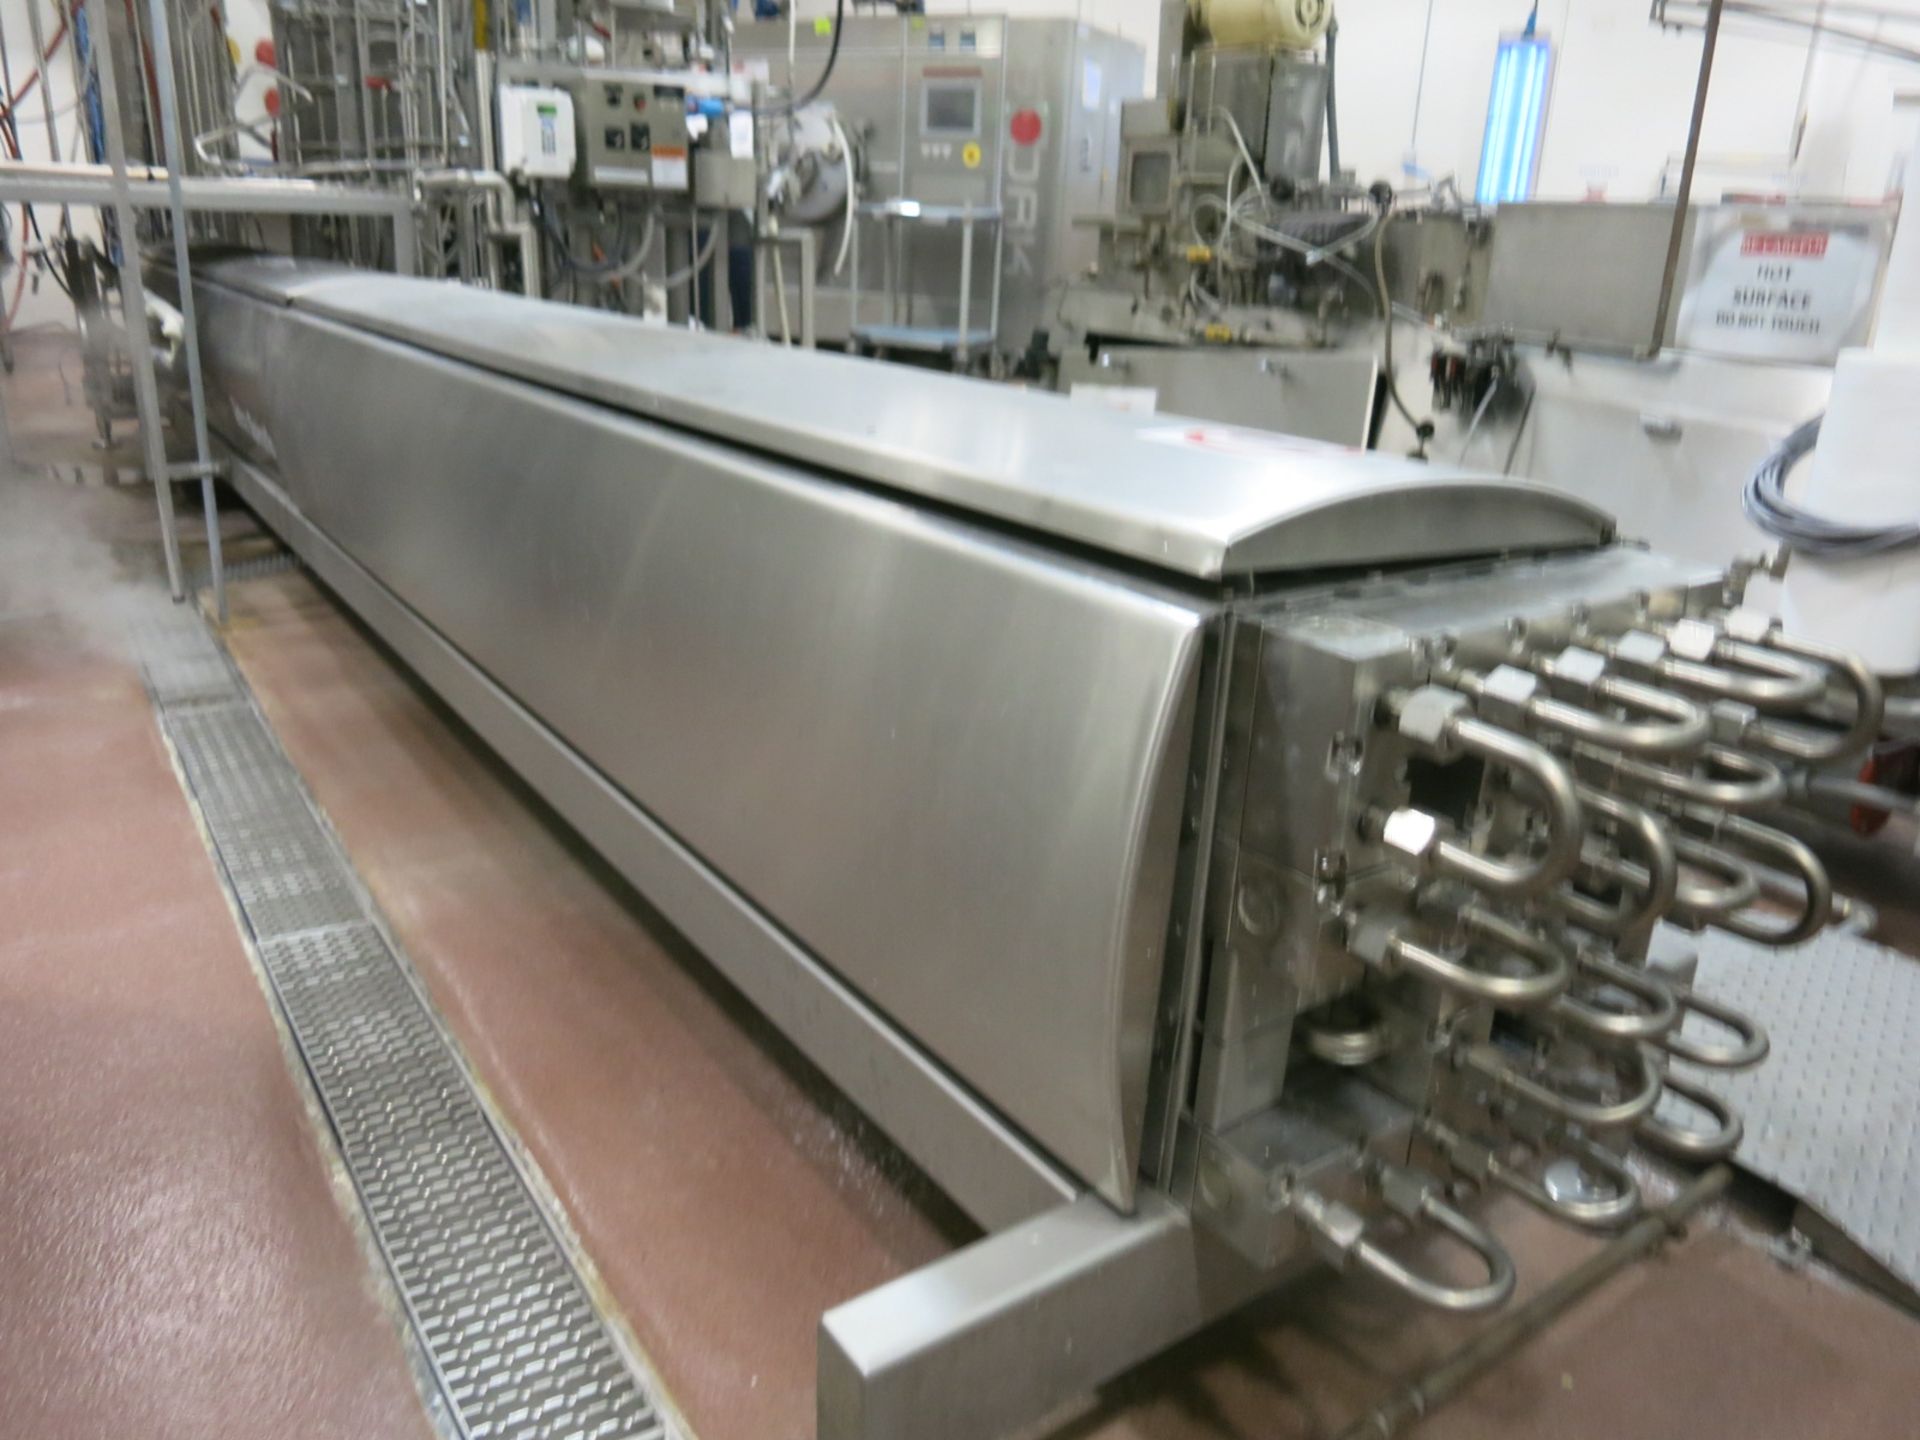 [BULK BID] Complete Tetra Pak UHT System (Note Lot 137 not included) - Image 4 of 21